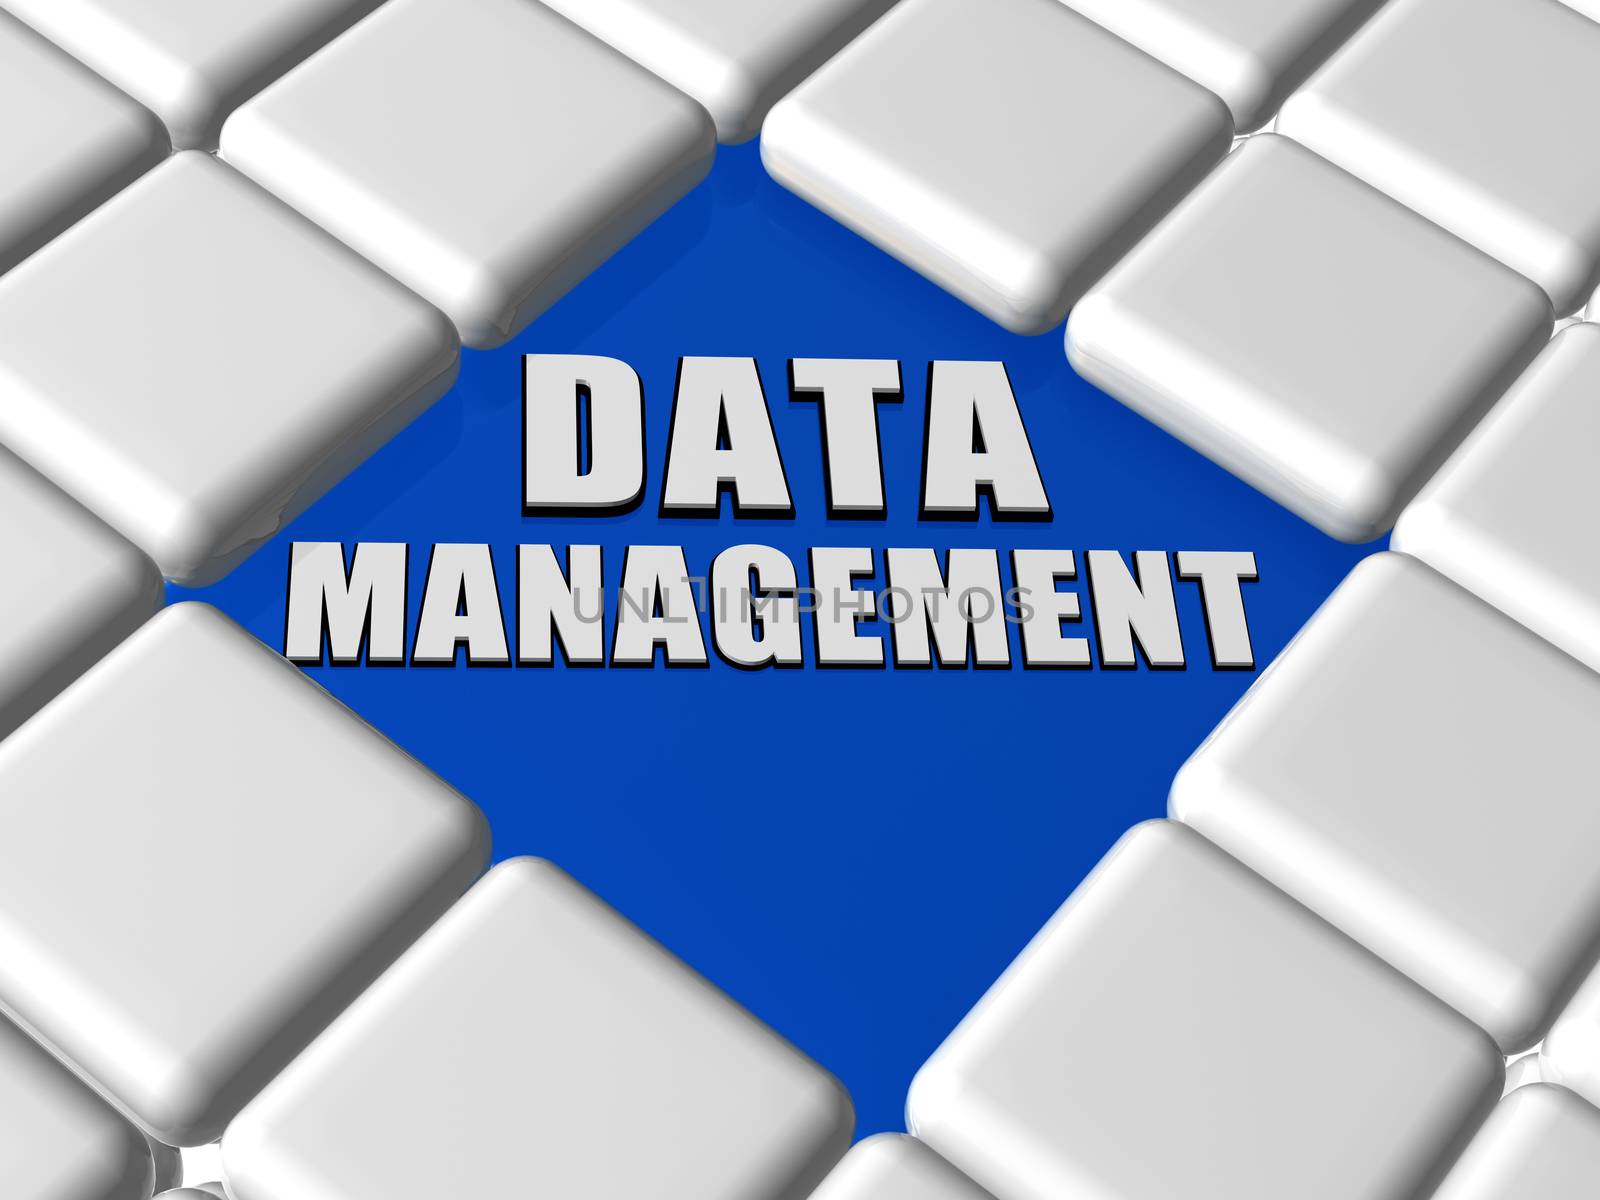 data management in boxes by marinini